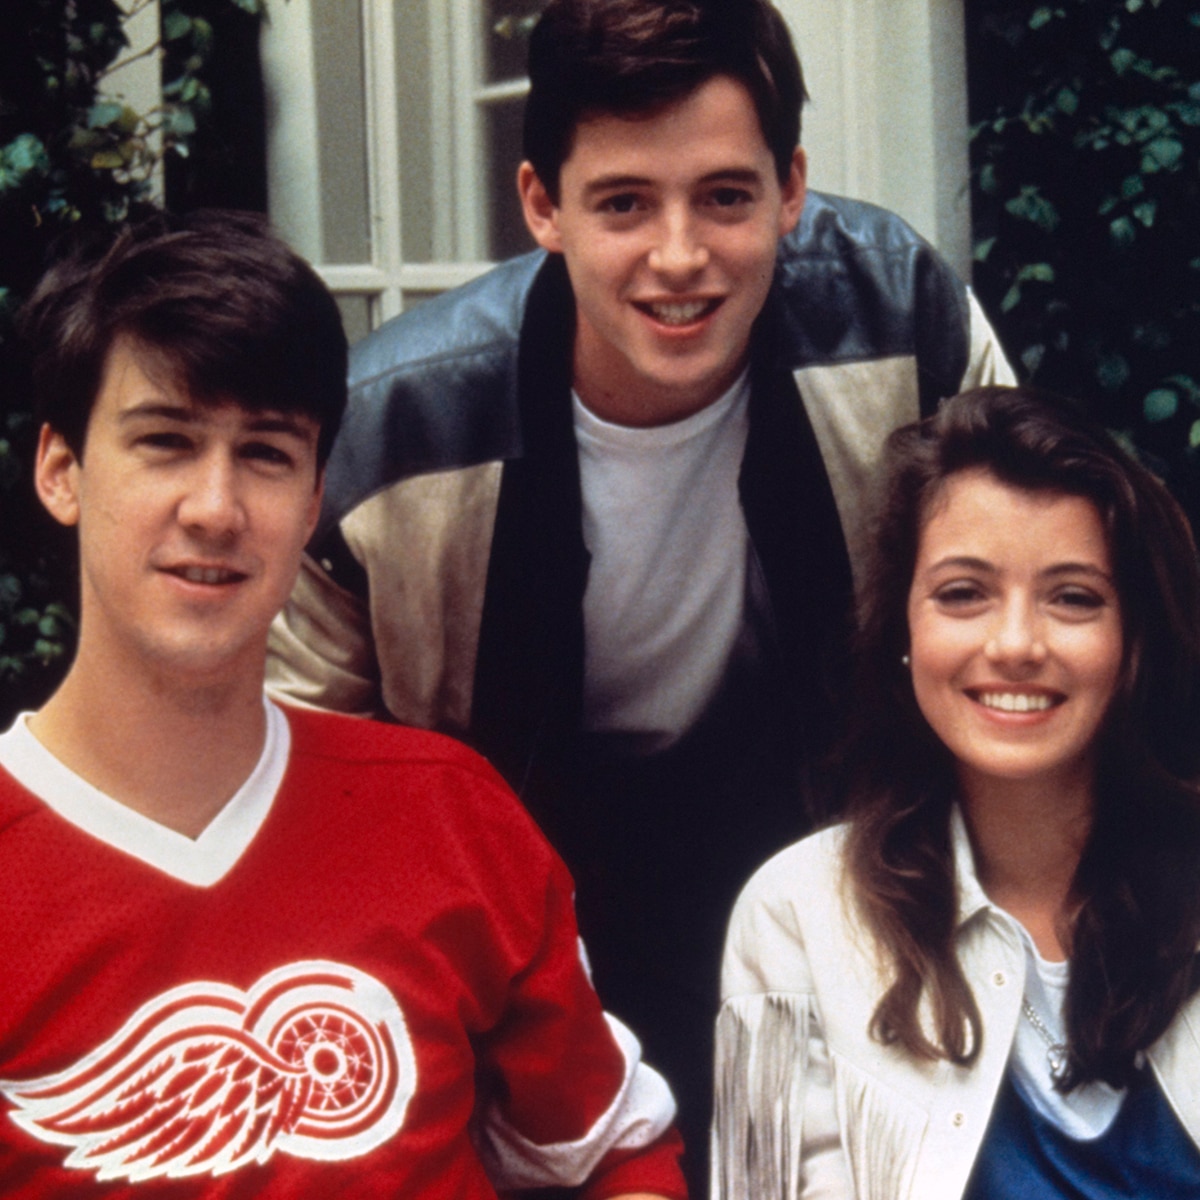 ferris buellers day off free online subtitles